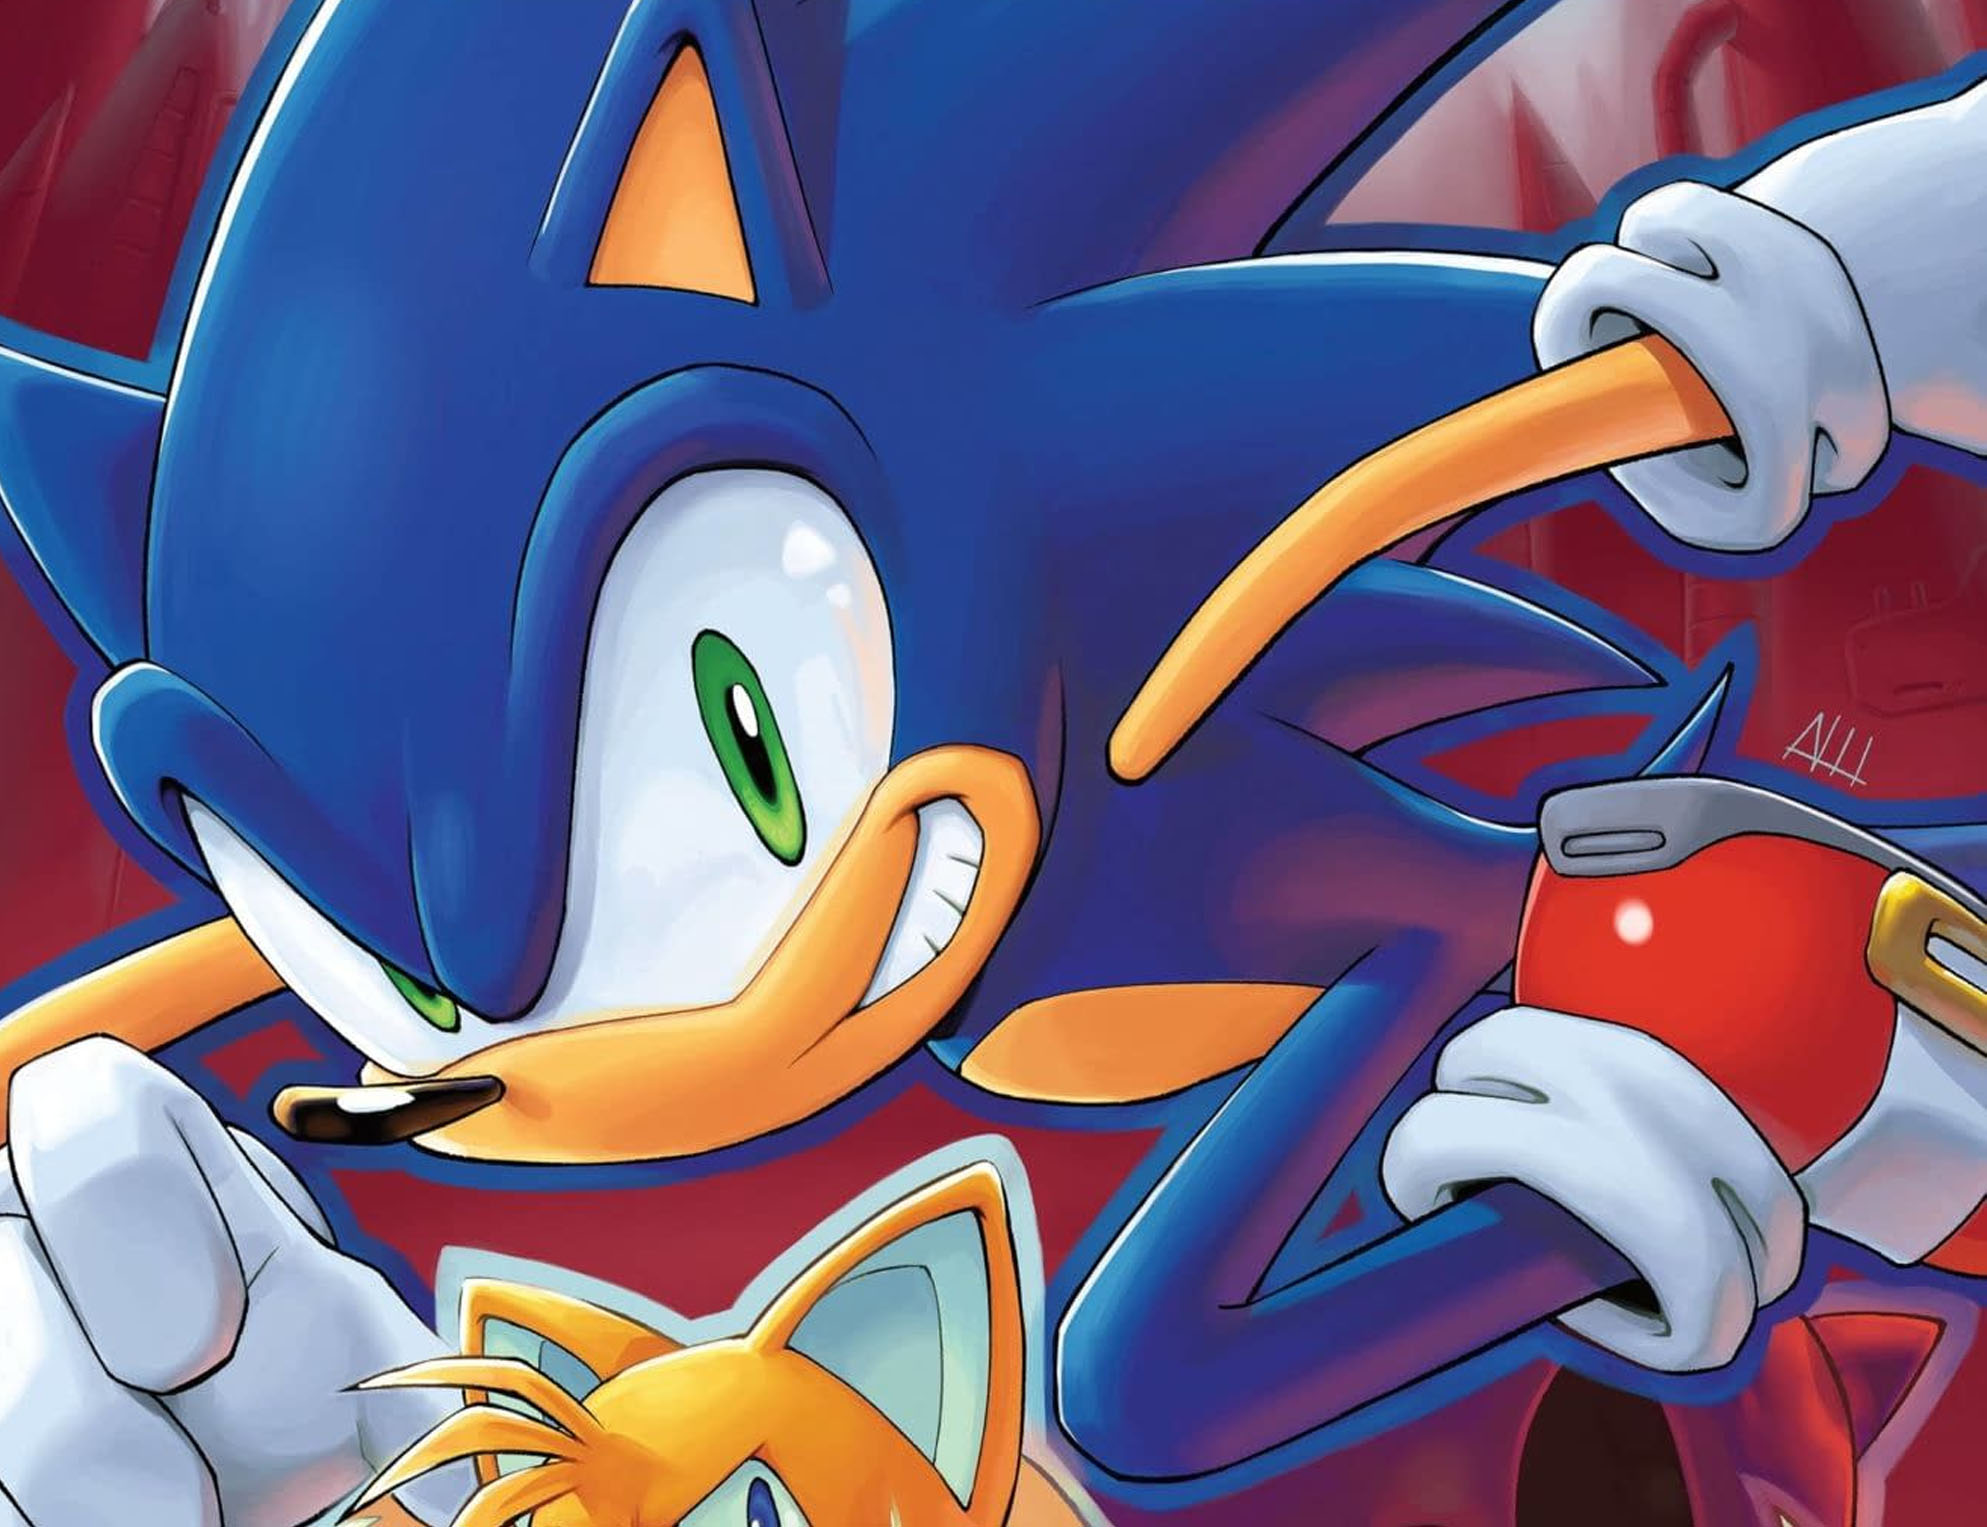 'Sonic the Hedgehog' #51 review